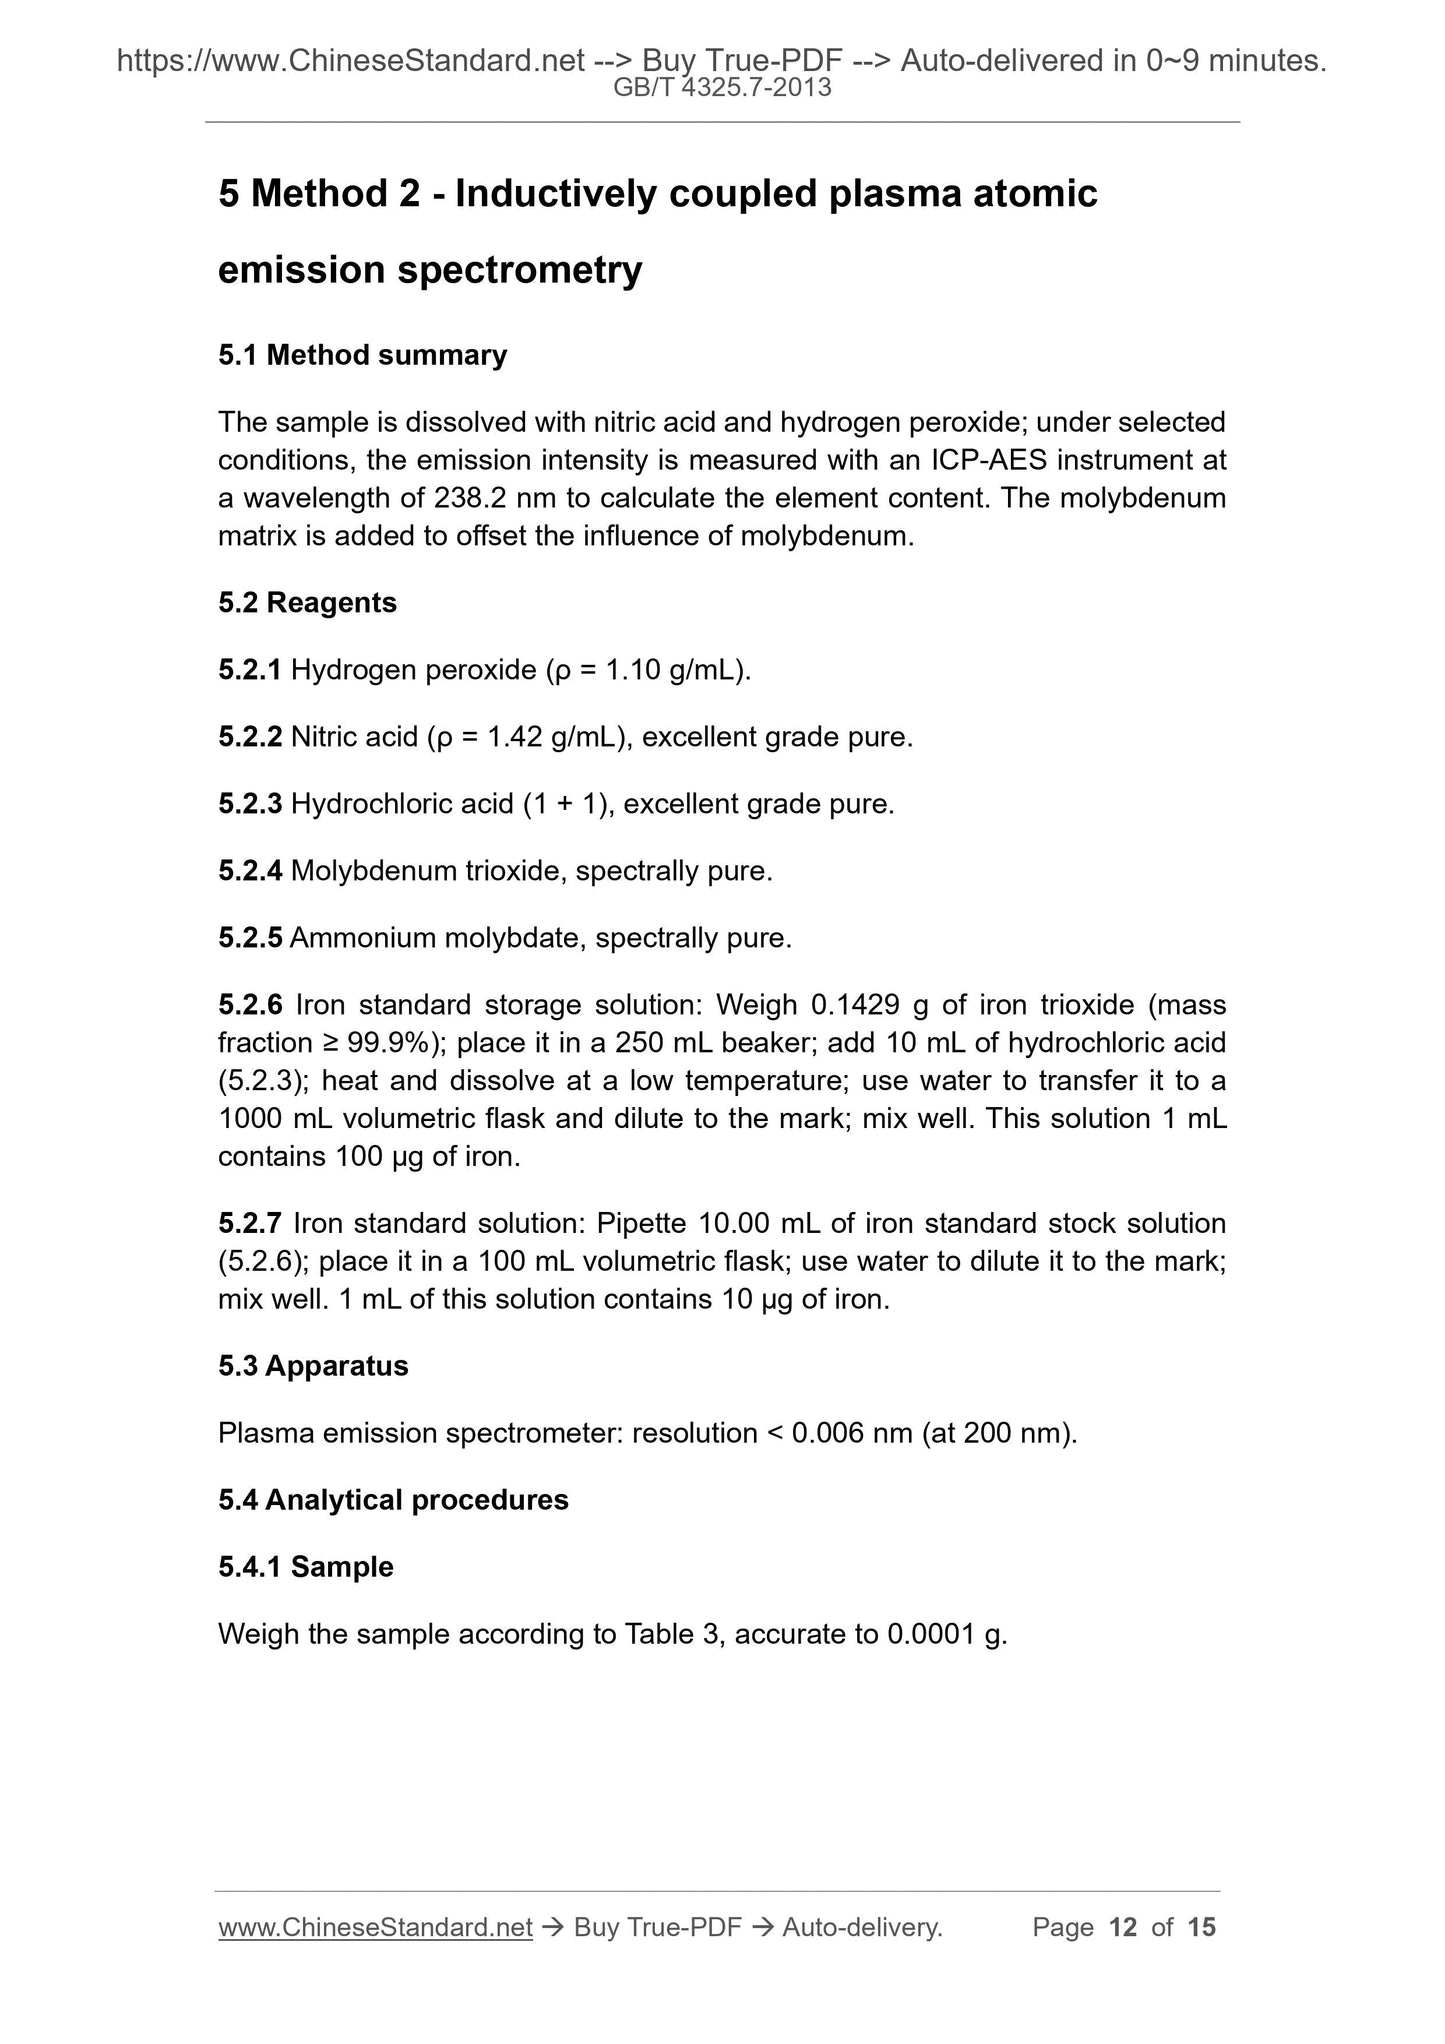 GB/T 4325.7-2013 Page 6